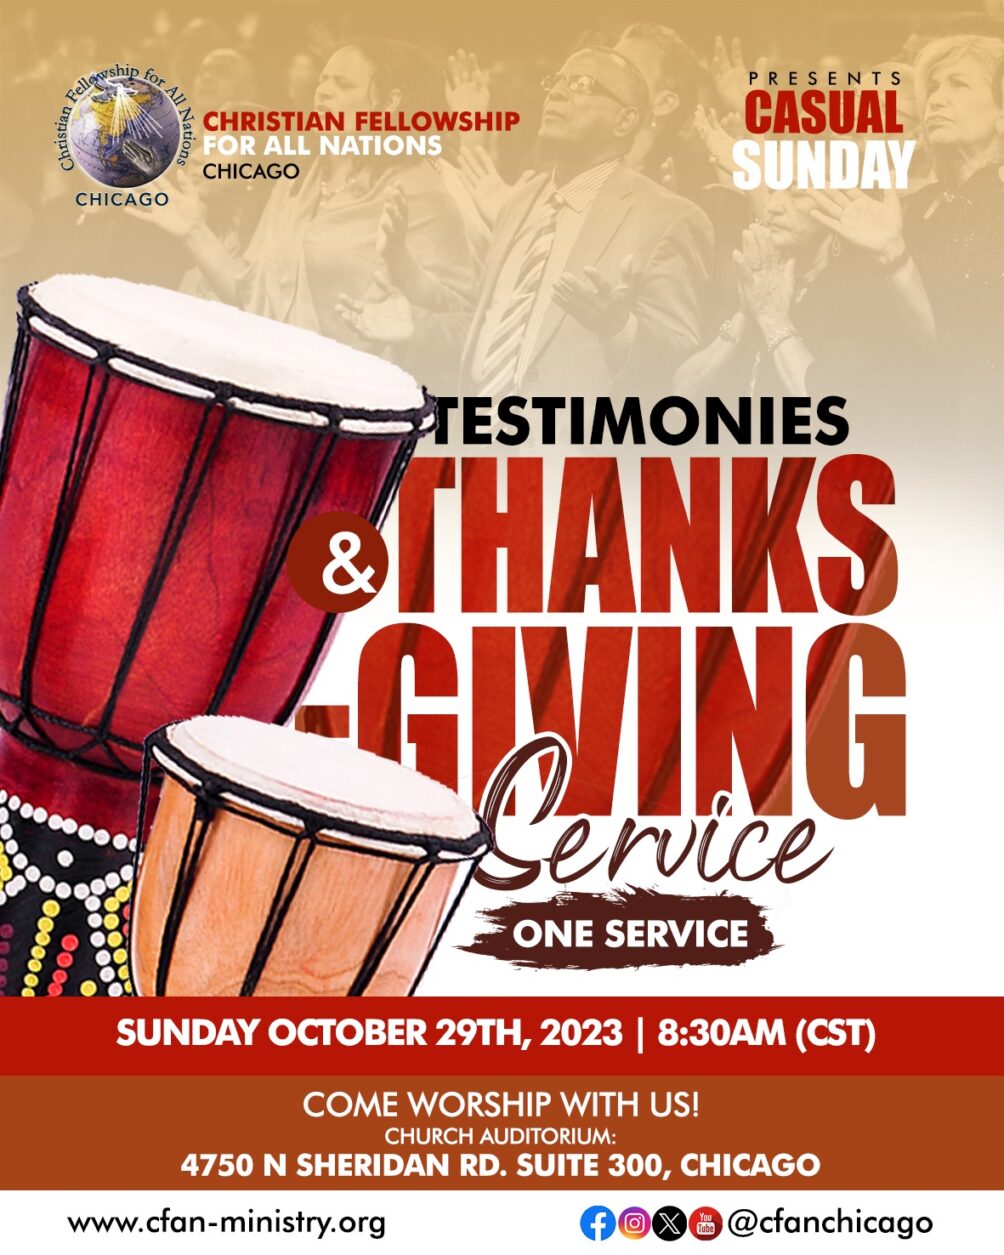 Casual Sunday - Testimonies and Thanks Giving Service - One Service